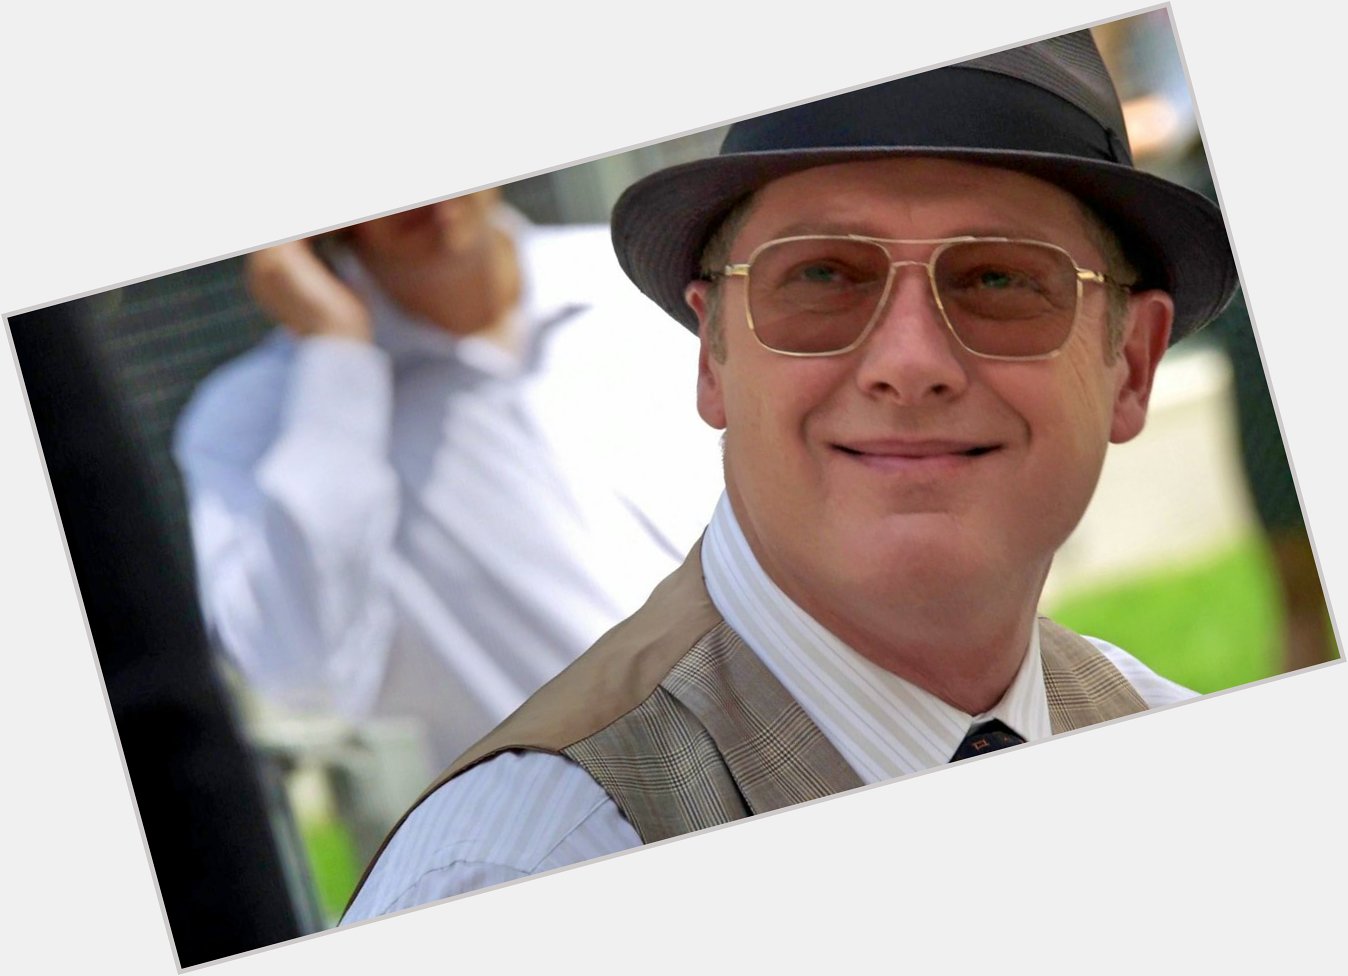  Happy Birthday to the one and only James Spader! 